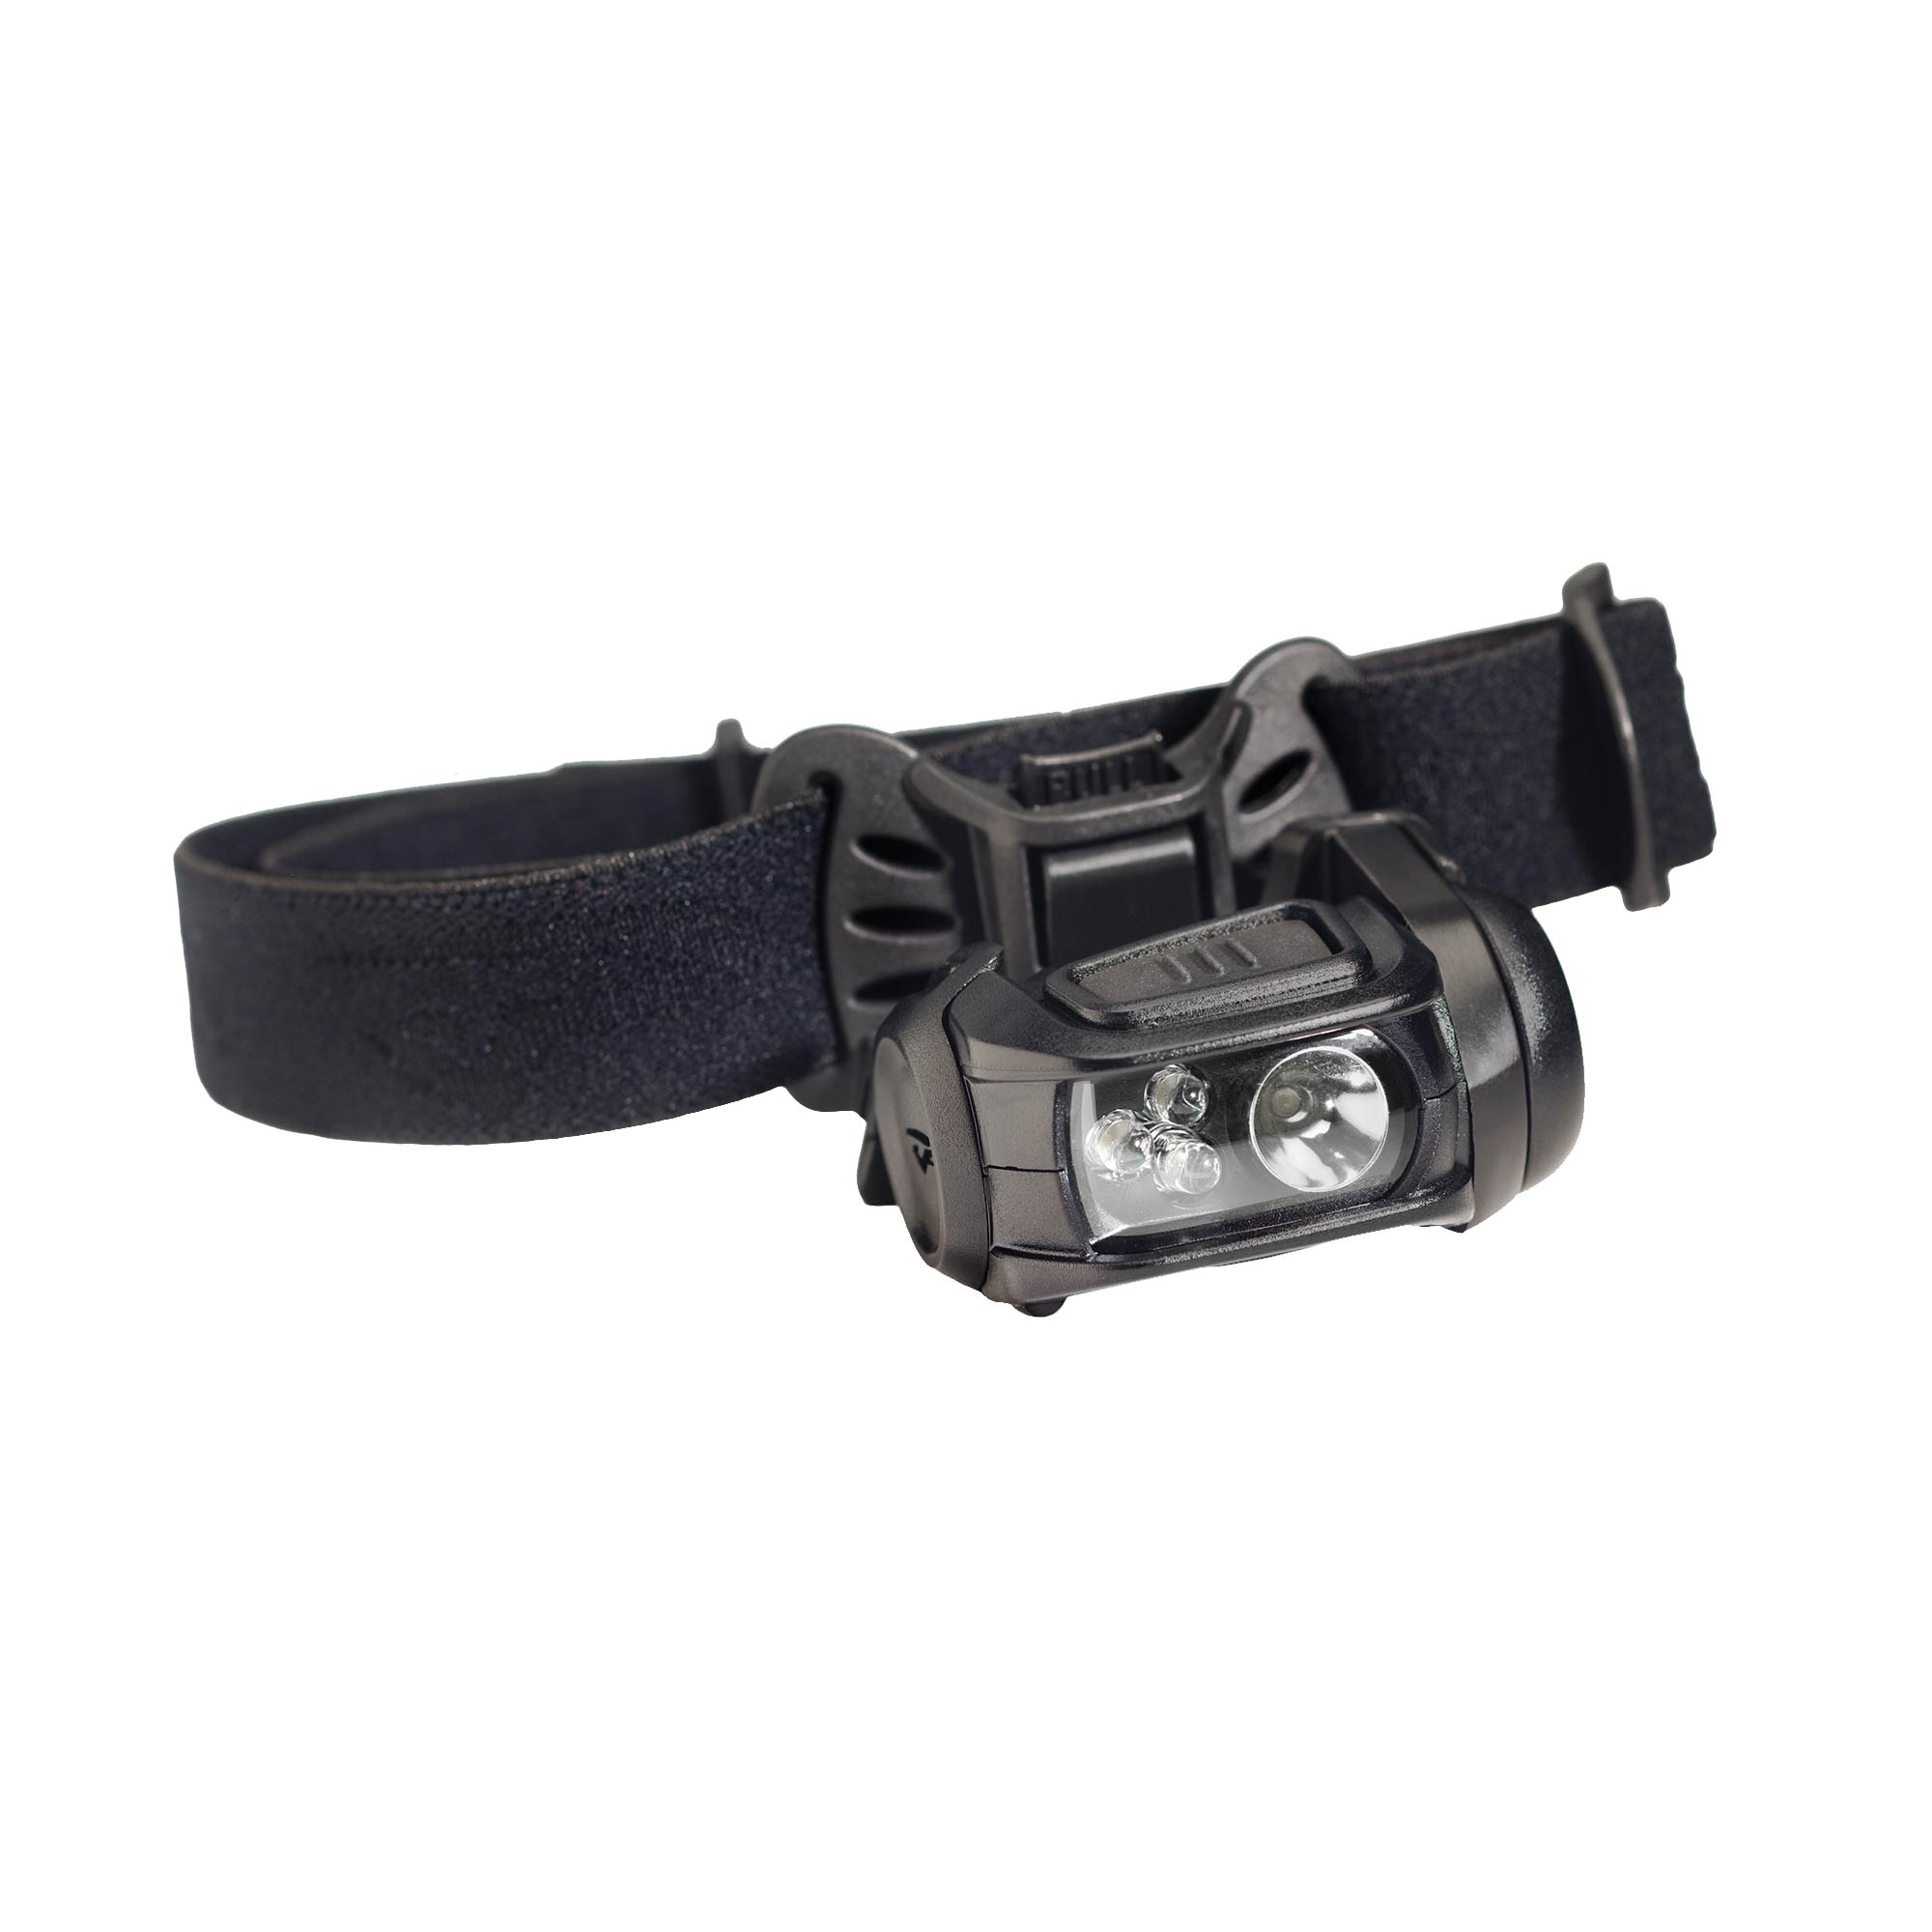 Princeton Tec Remix Pro Headlamp With Red//green//ir//white LEDs Multicam for sale online